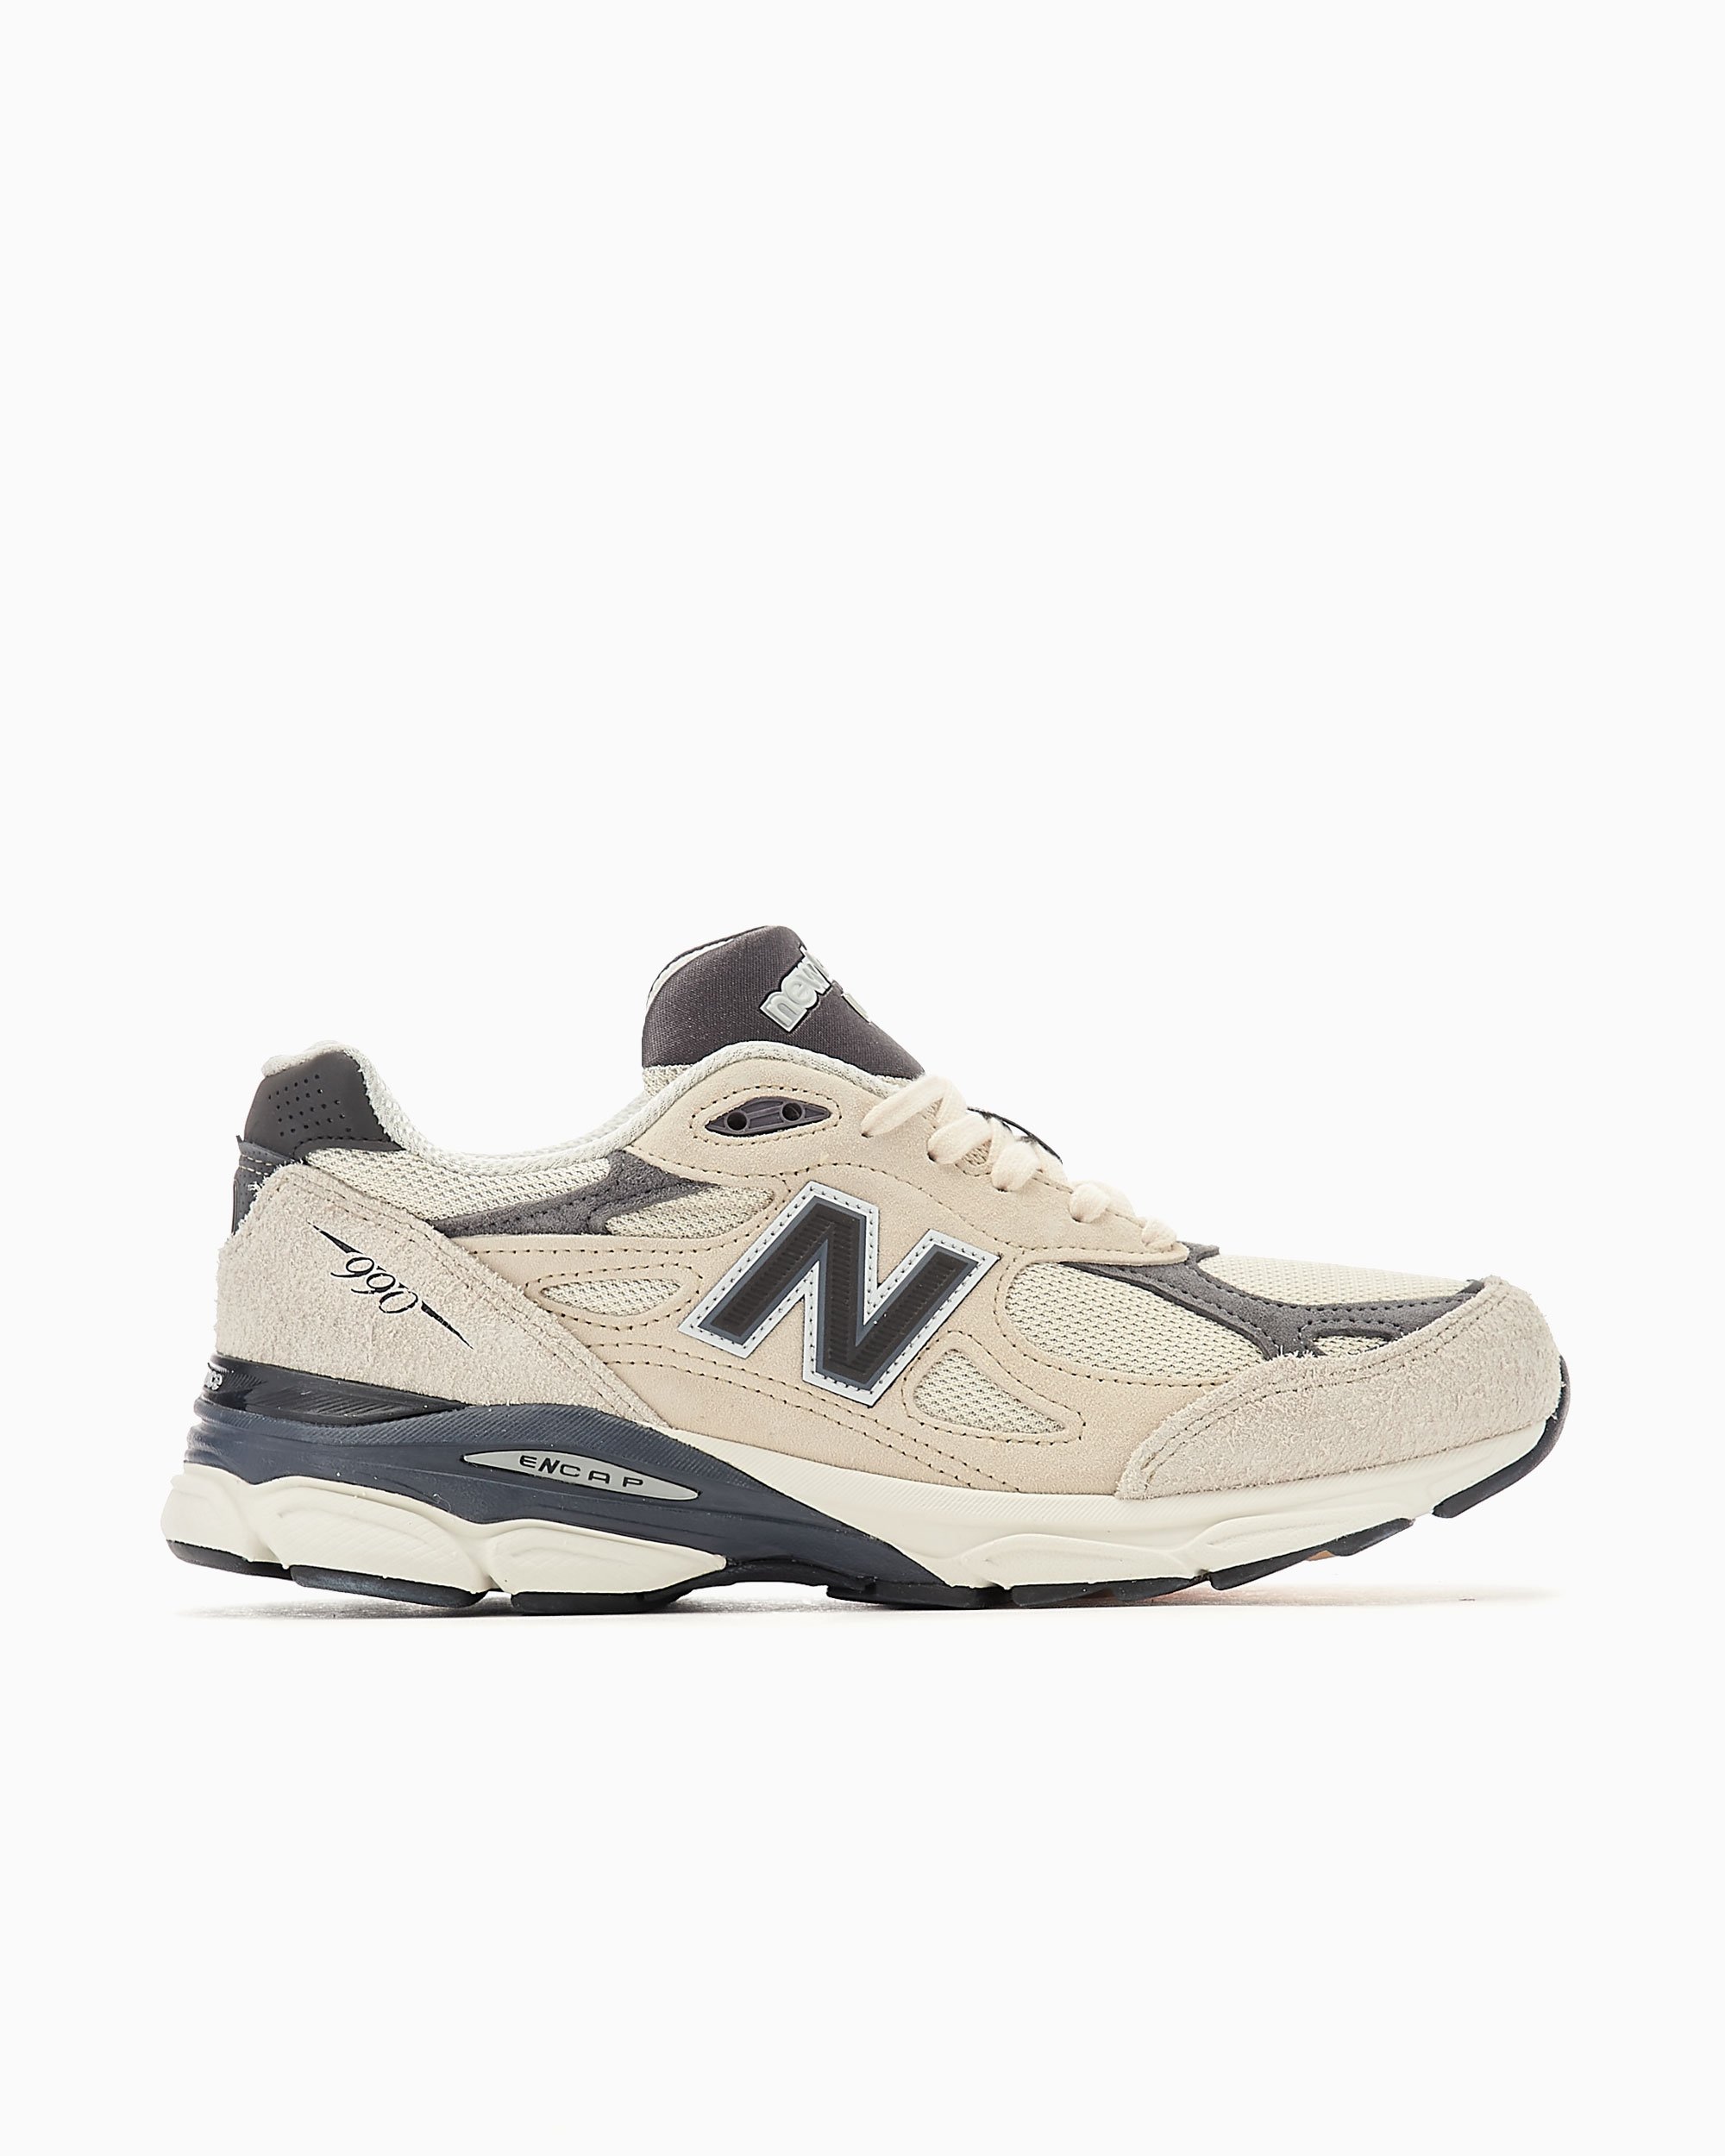 New Balance M990v3 AD3 Made in USA-